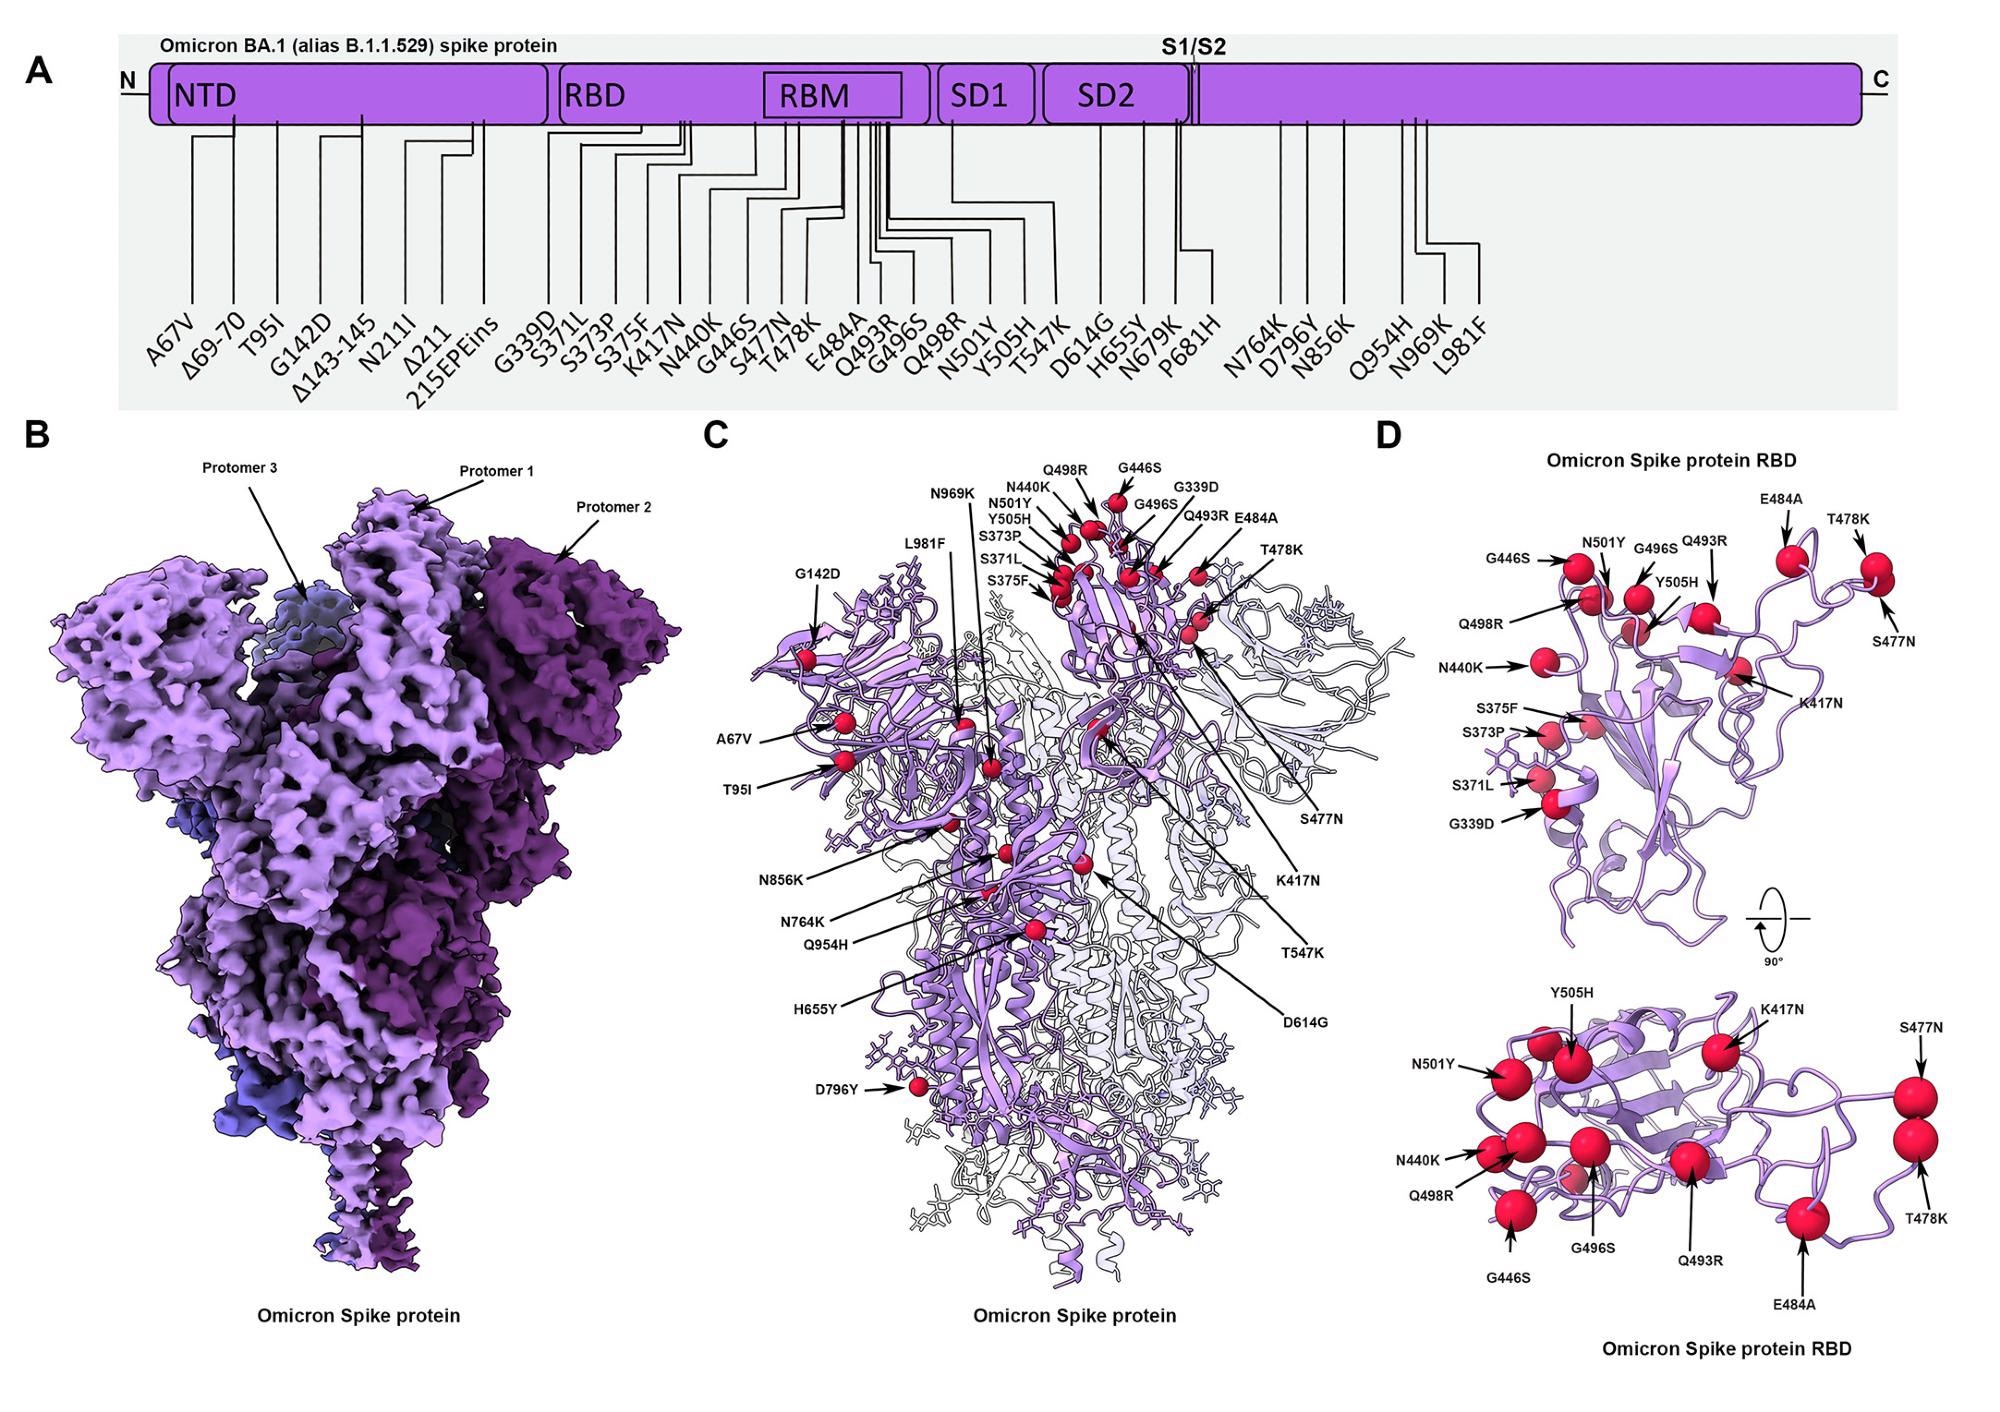 Cryo-EM structure of the Omicron spike protein.  (A) A schematic diagram showing the domain arrangement of the spike protein.  Mutations present in Omicron type spike proteins are labeled.  (B) Cryo-EM map of the Omicron spike protein at 2.79 resolution.  The protomers are colored in various shades of purple.  (C) Cryo-EM structure of the Omicron spike protein showing the locations of the modeling mutations on a protomer.  (D) Omicron spike receptor-binding domain (RBD) shown in two orthogonal orientations with the Cα positions of the mutated residues shown as red regions.